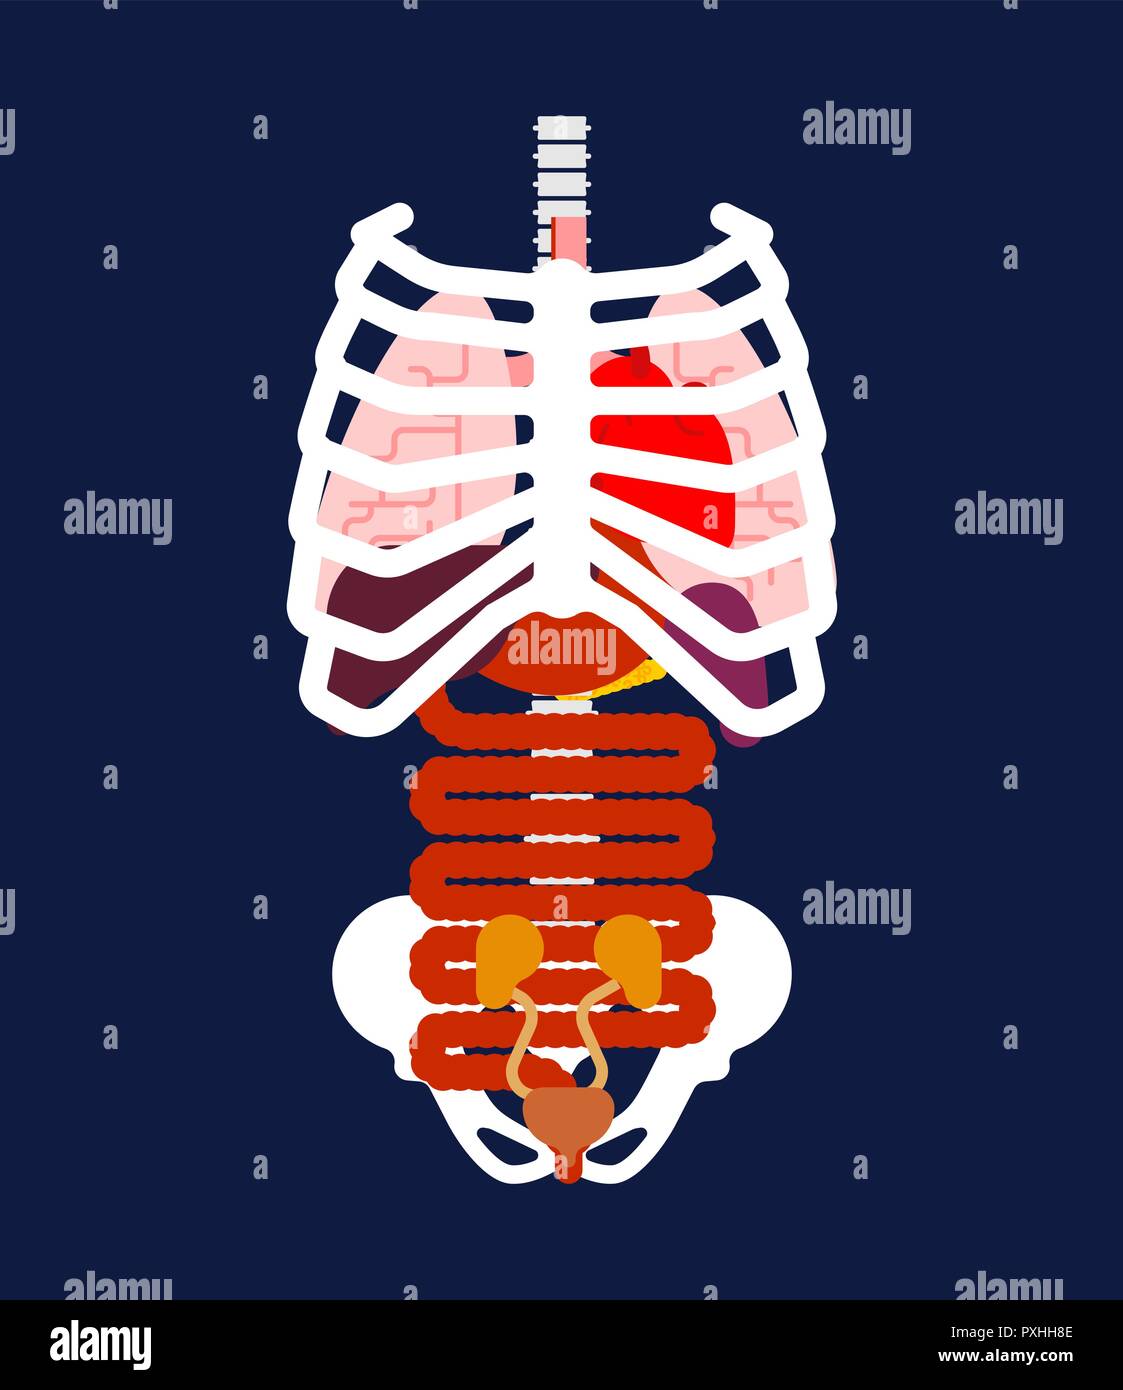 rib cage heart drawing clipart